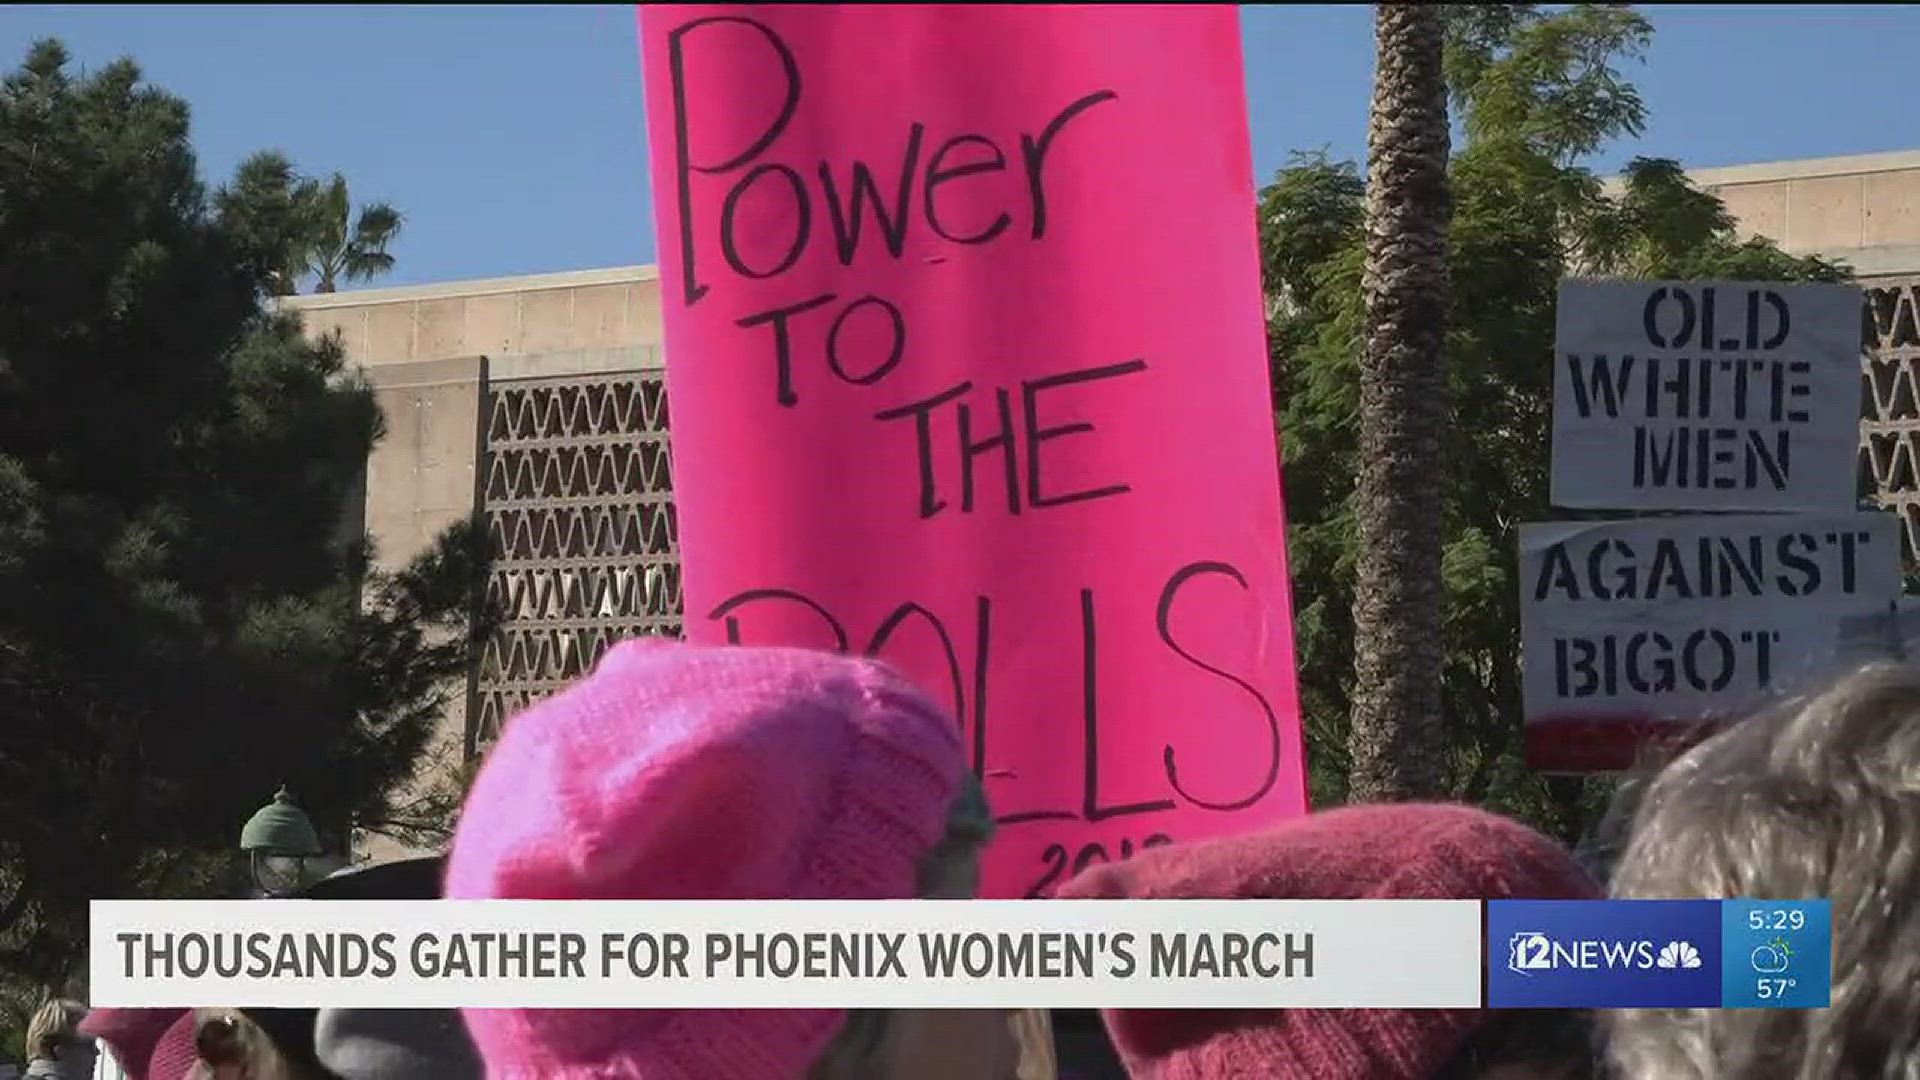 Thousands marched for equality and justice for all across Arizona this weekend.